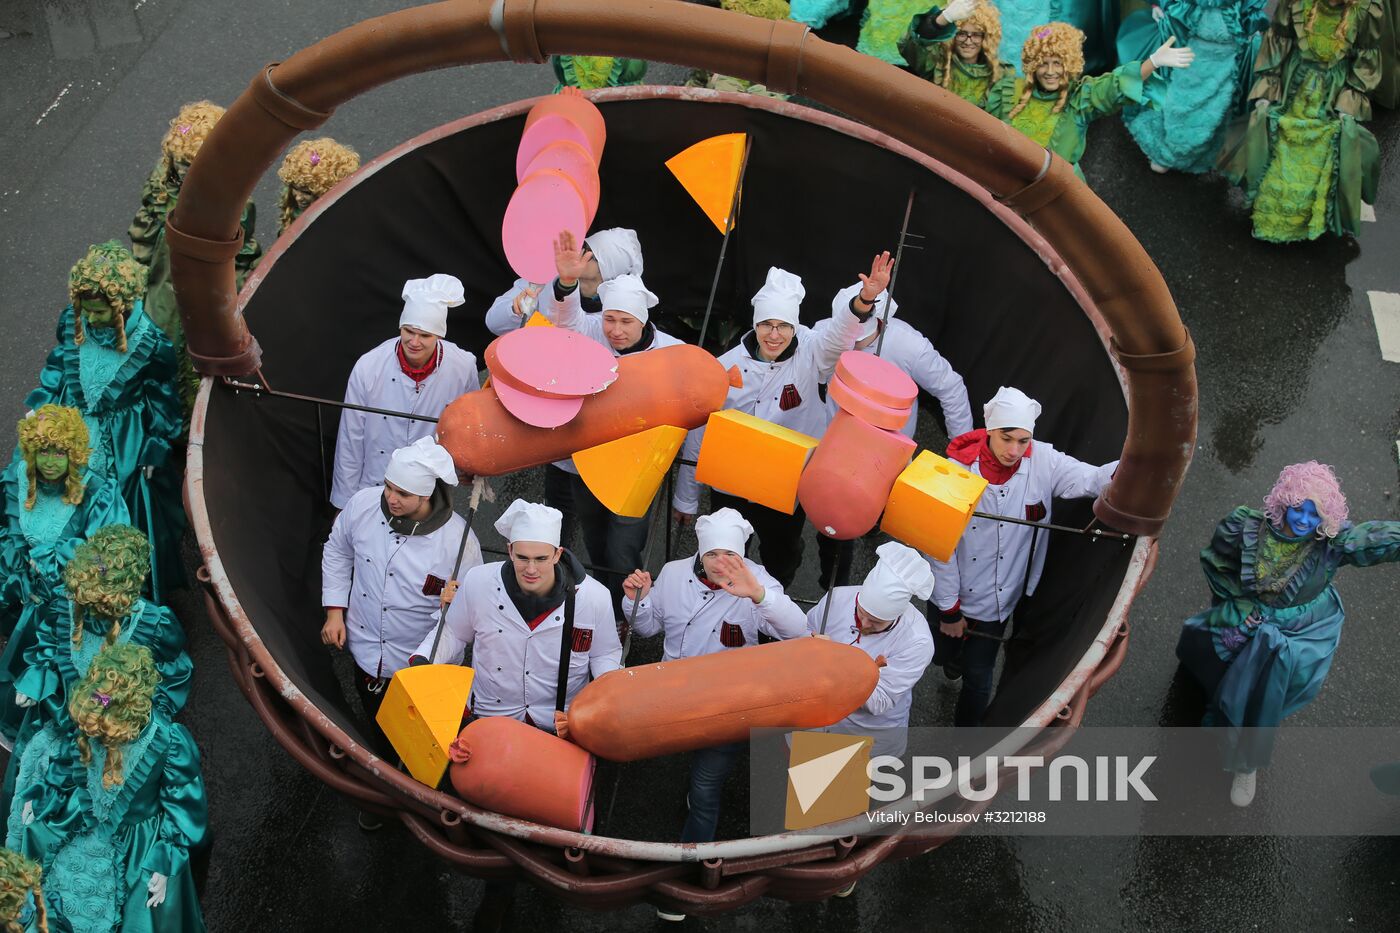 Carnival procession as part of 19th World Festival of Youth and Students